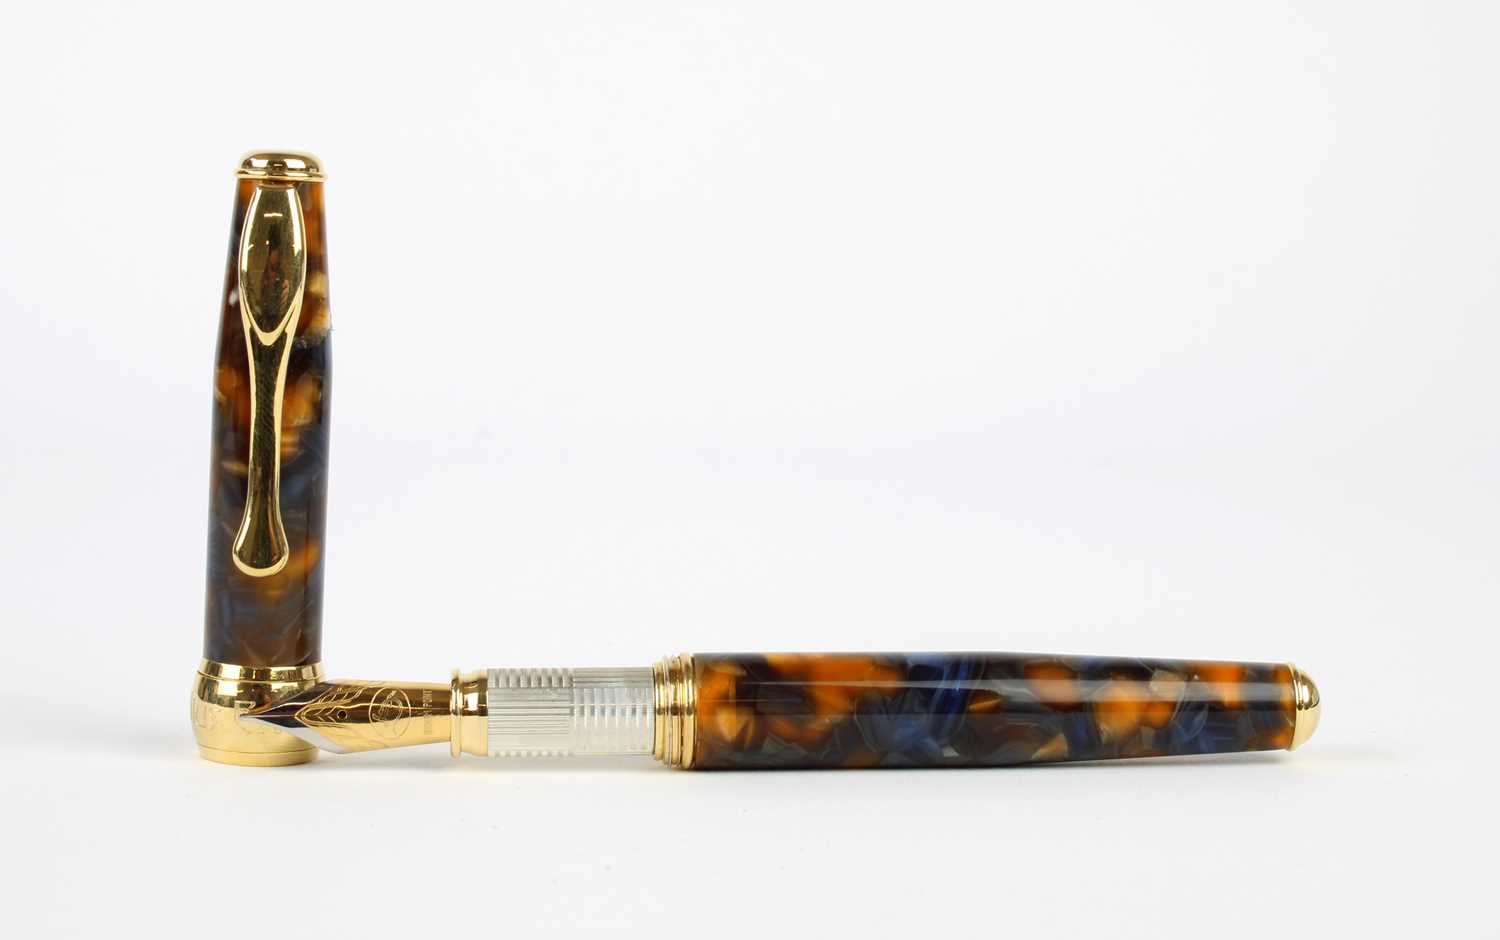 Grifos, Italy "Harlequin" Fountain Pen - Image 2 of 3